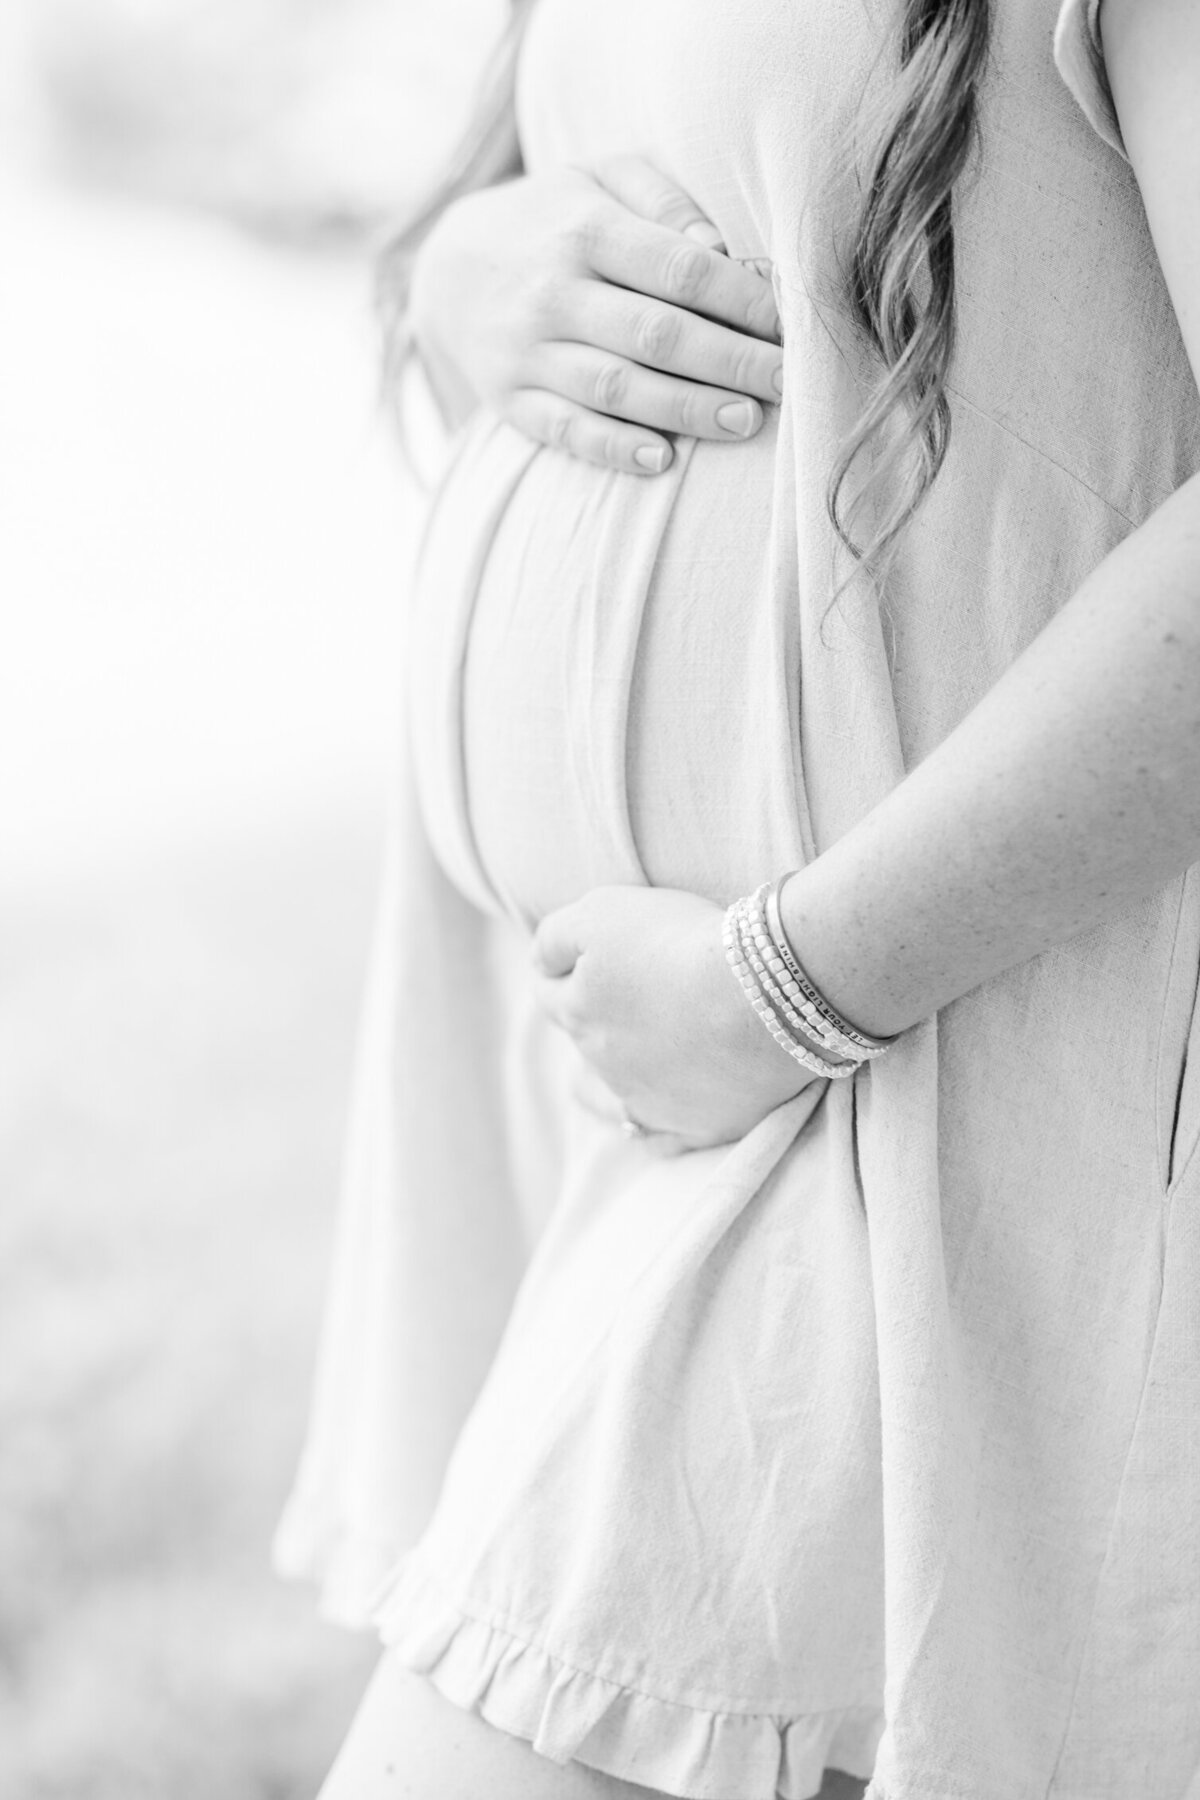 Black and white close up of Boston mom's baby bump, cradled in her hands